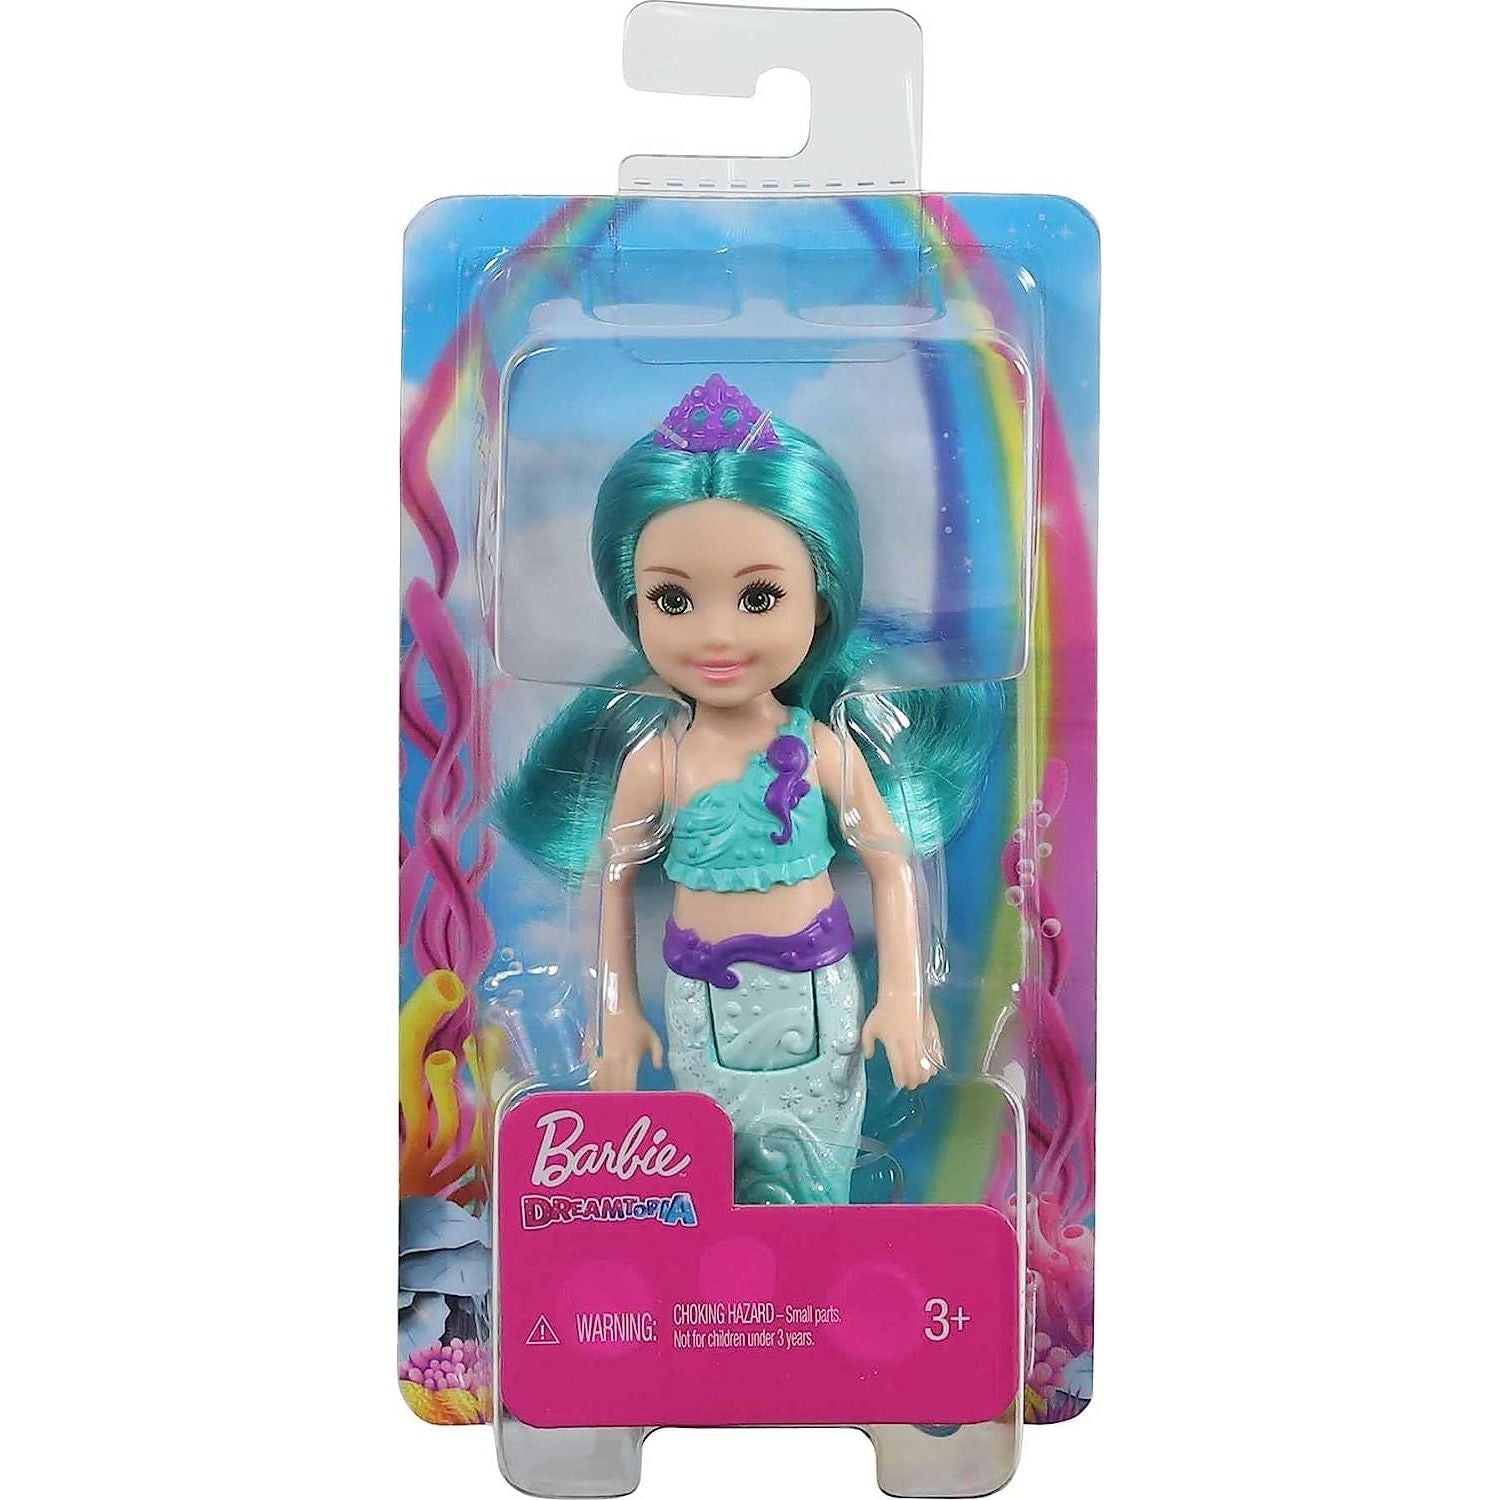 Barbie Dreamtopia Chelsea Mermaid Doll with Teal Hair & Tail, Tiara Accessory, Small Doll Bends At Waist